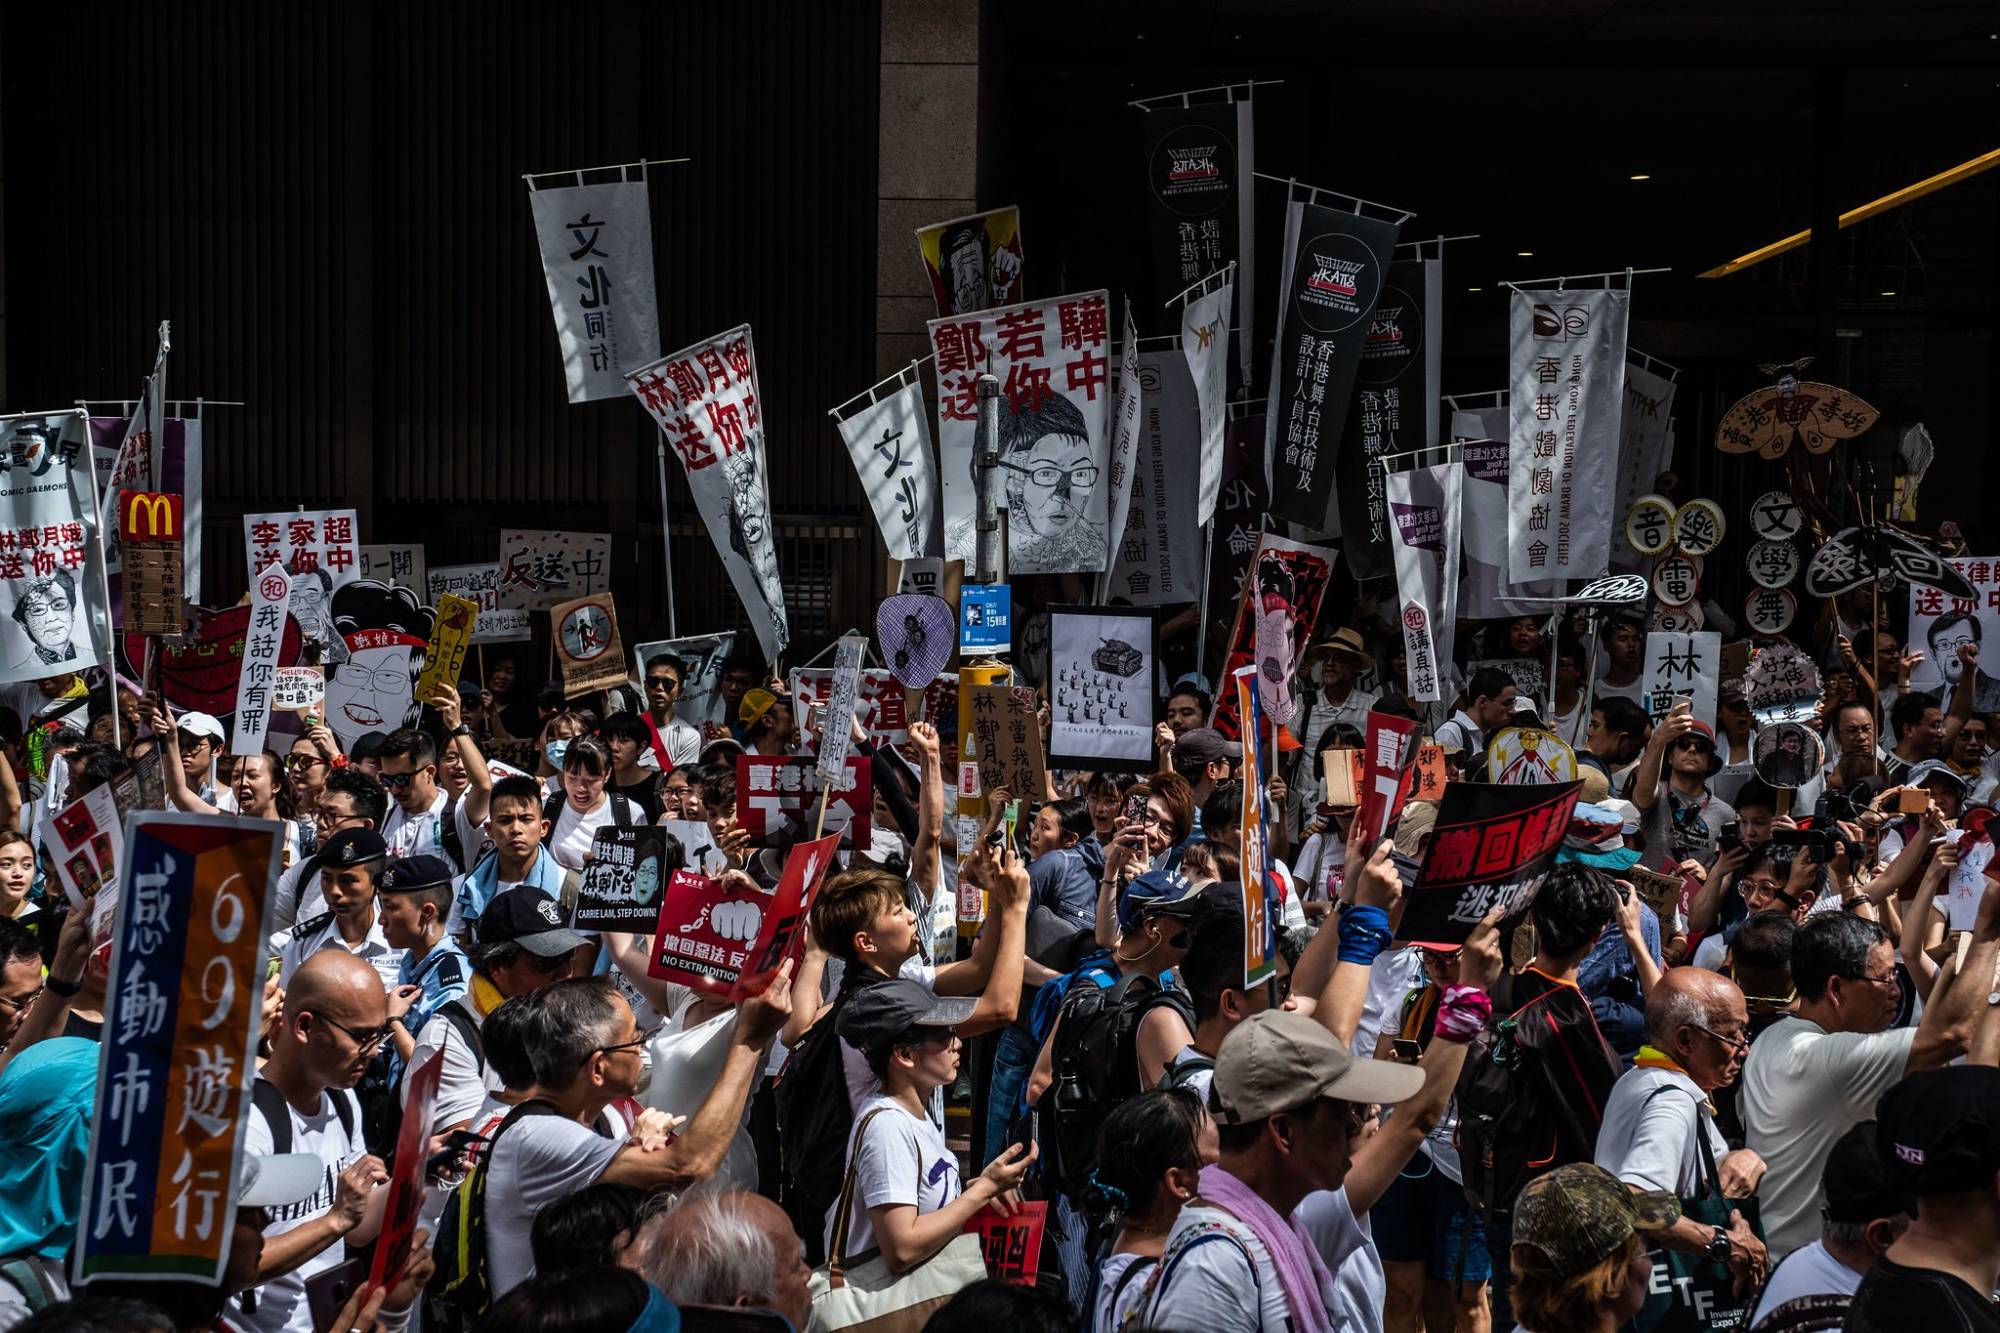 A crowd participating in a protest in Hong Kong